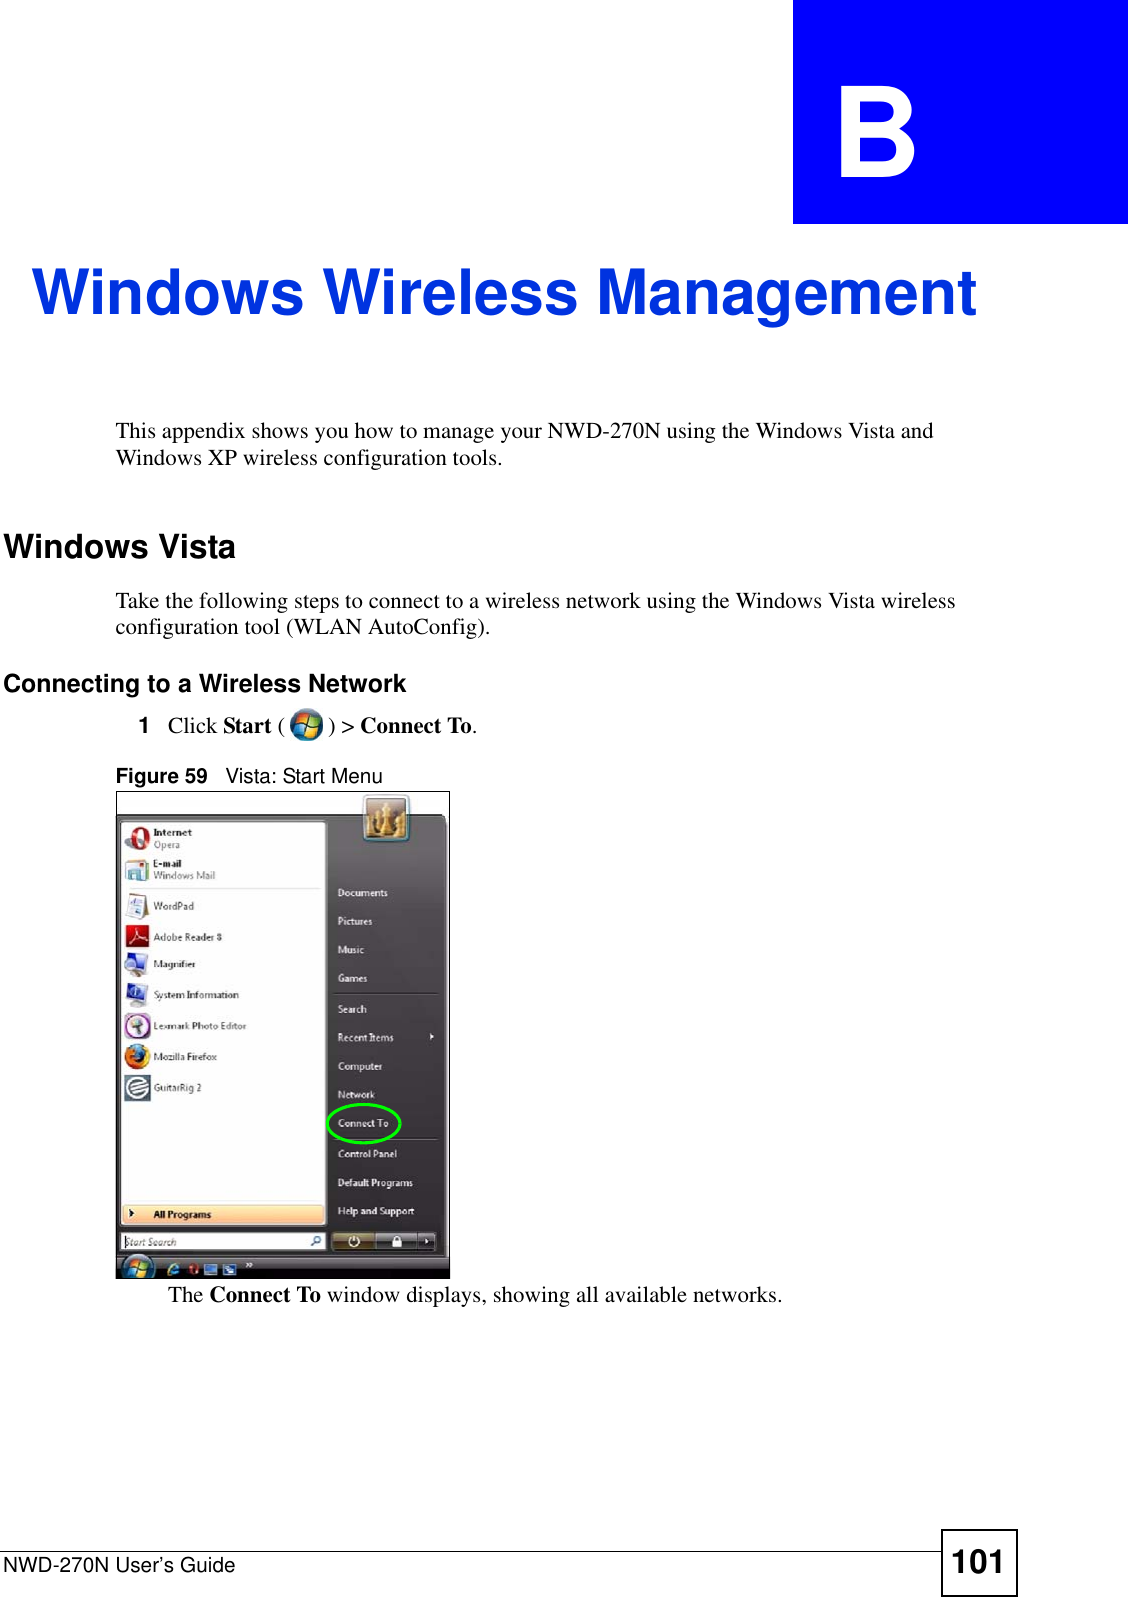 NWD-270N User’s Guide 101APPENDIX  B Windows Wireless ManagementThis appendix shows you how to manage your NWD-270N using the Windows Vista and Windows XP wireless configuration tools.Windows VistaTake the following steps to connect to a wireless network using the Windows Vista wireless configuration tool (WLAN AutoConfig).Connecting to a Wireless Network1Click Start () &gt; Connect To. Figure 59   Vista: Start MenuThe Connect To window displays, showing all available networks. 